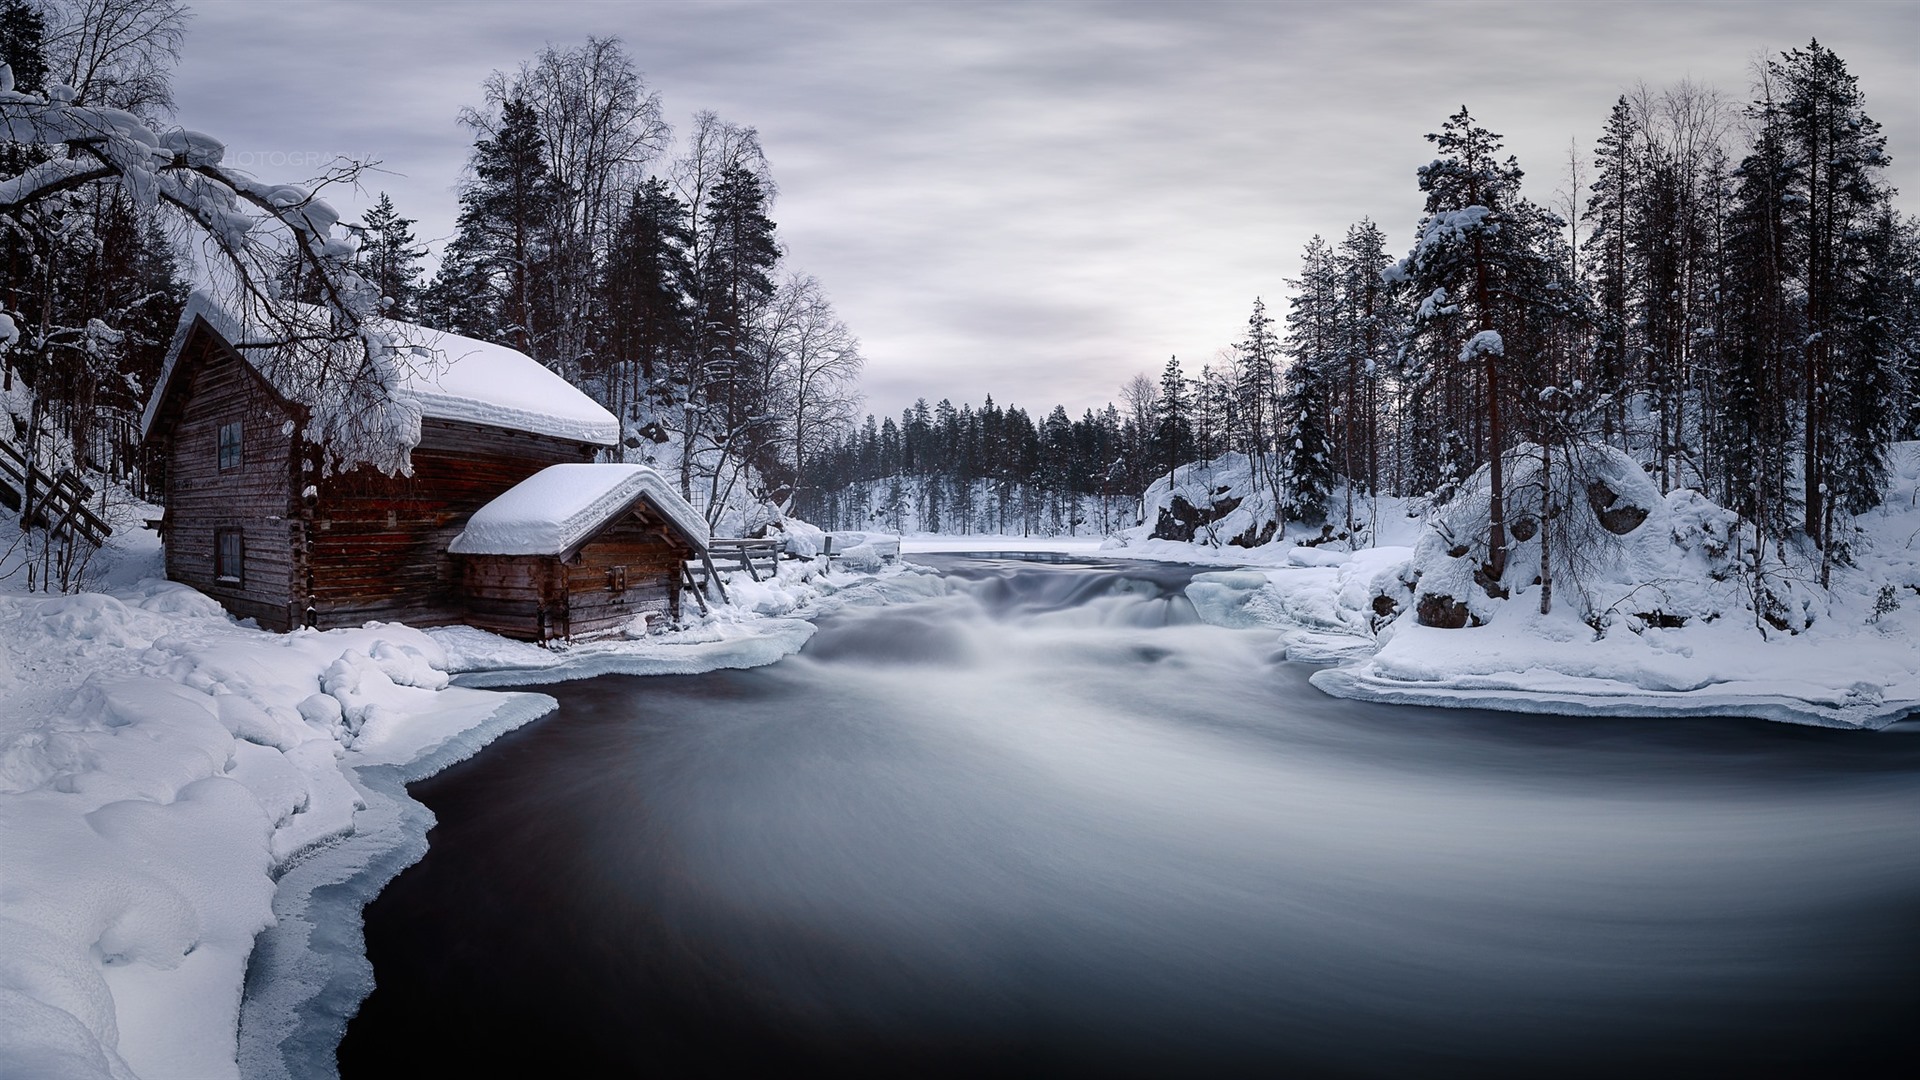 Wallpaper Winter, snow, river, house, trees 1920x1080 Full HD 2K Picture, Image